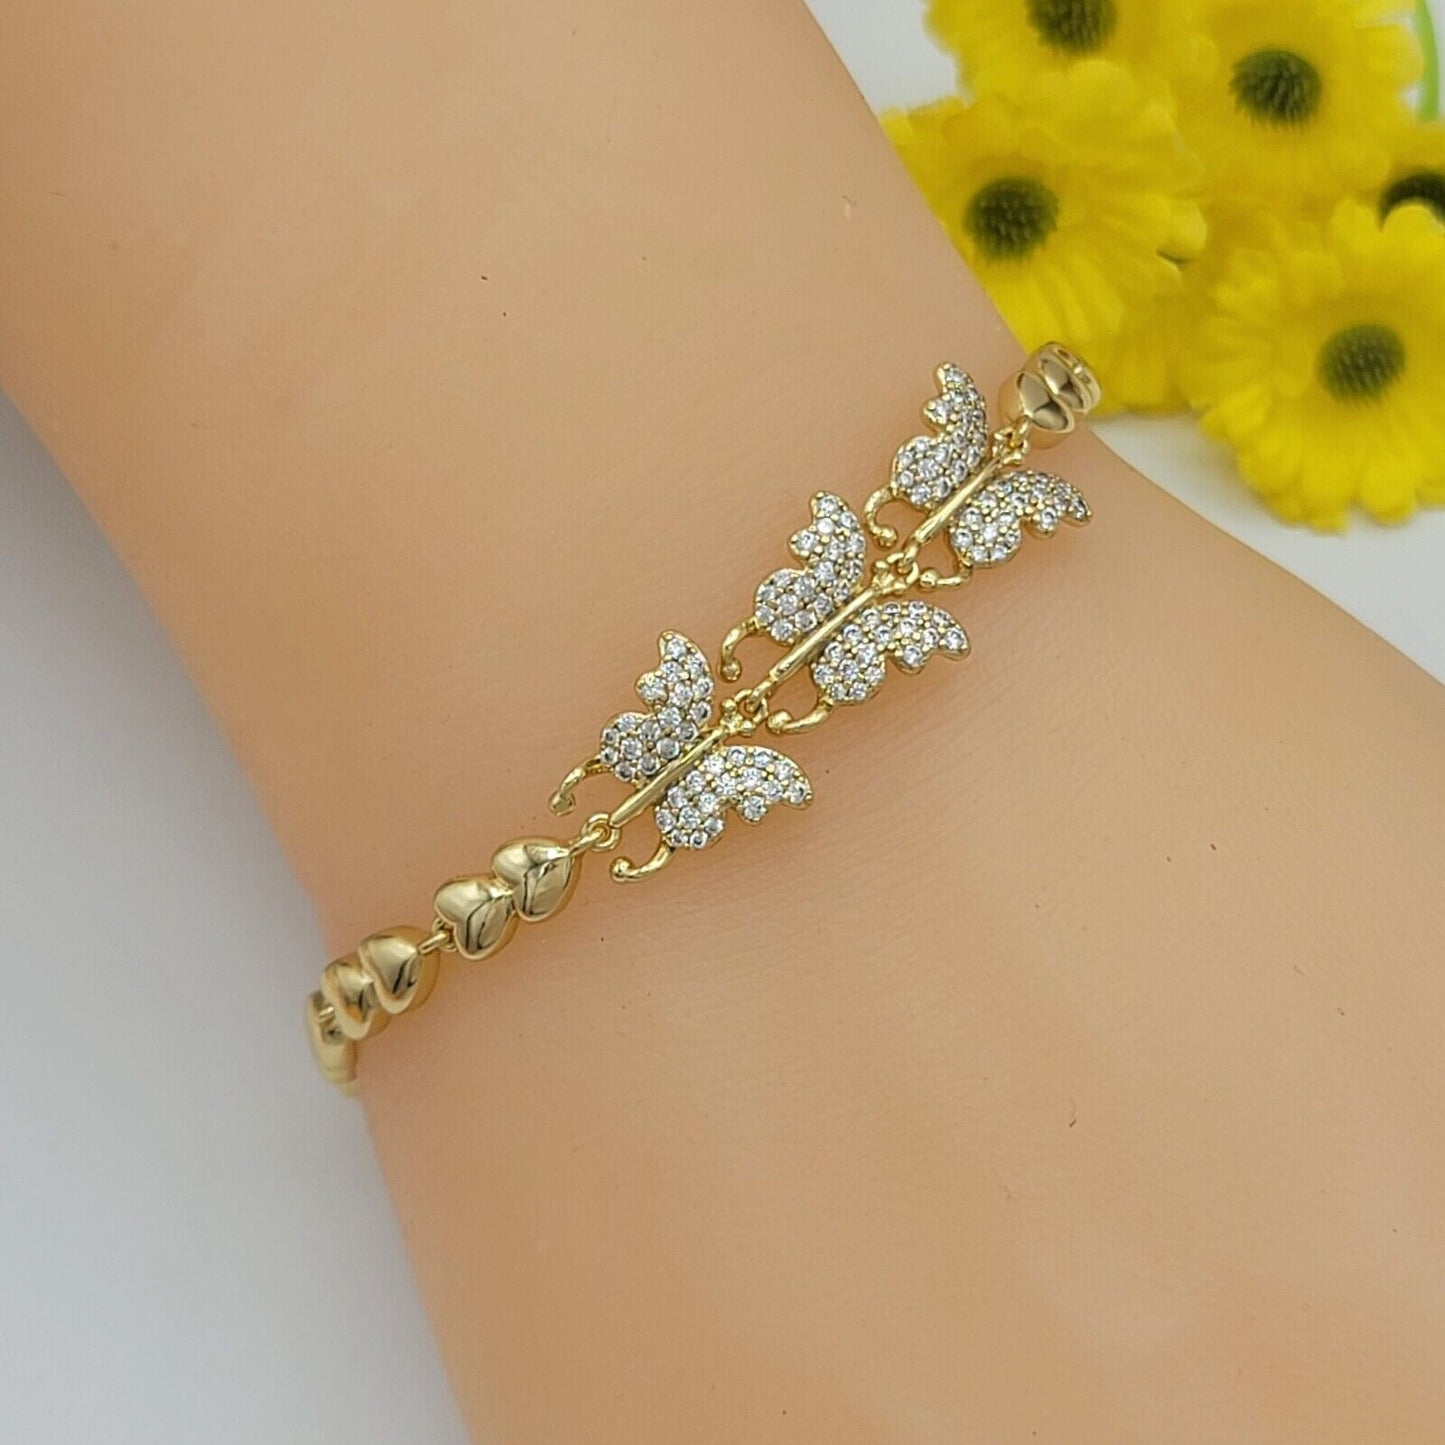 Bracelets - 14K Gold Plated. 3 Butterflies Icy Crystals Bracelet. Hearts chains